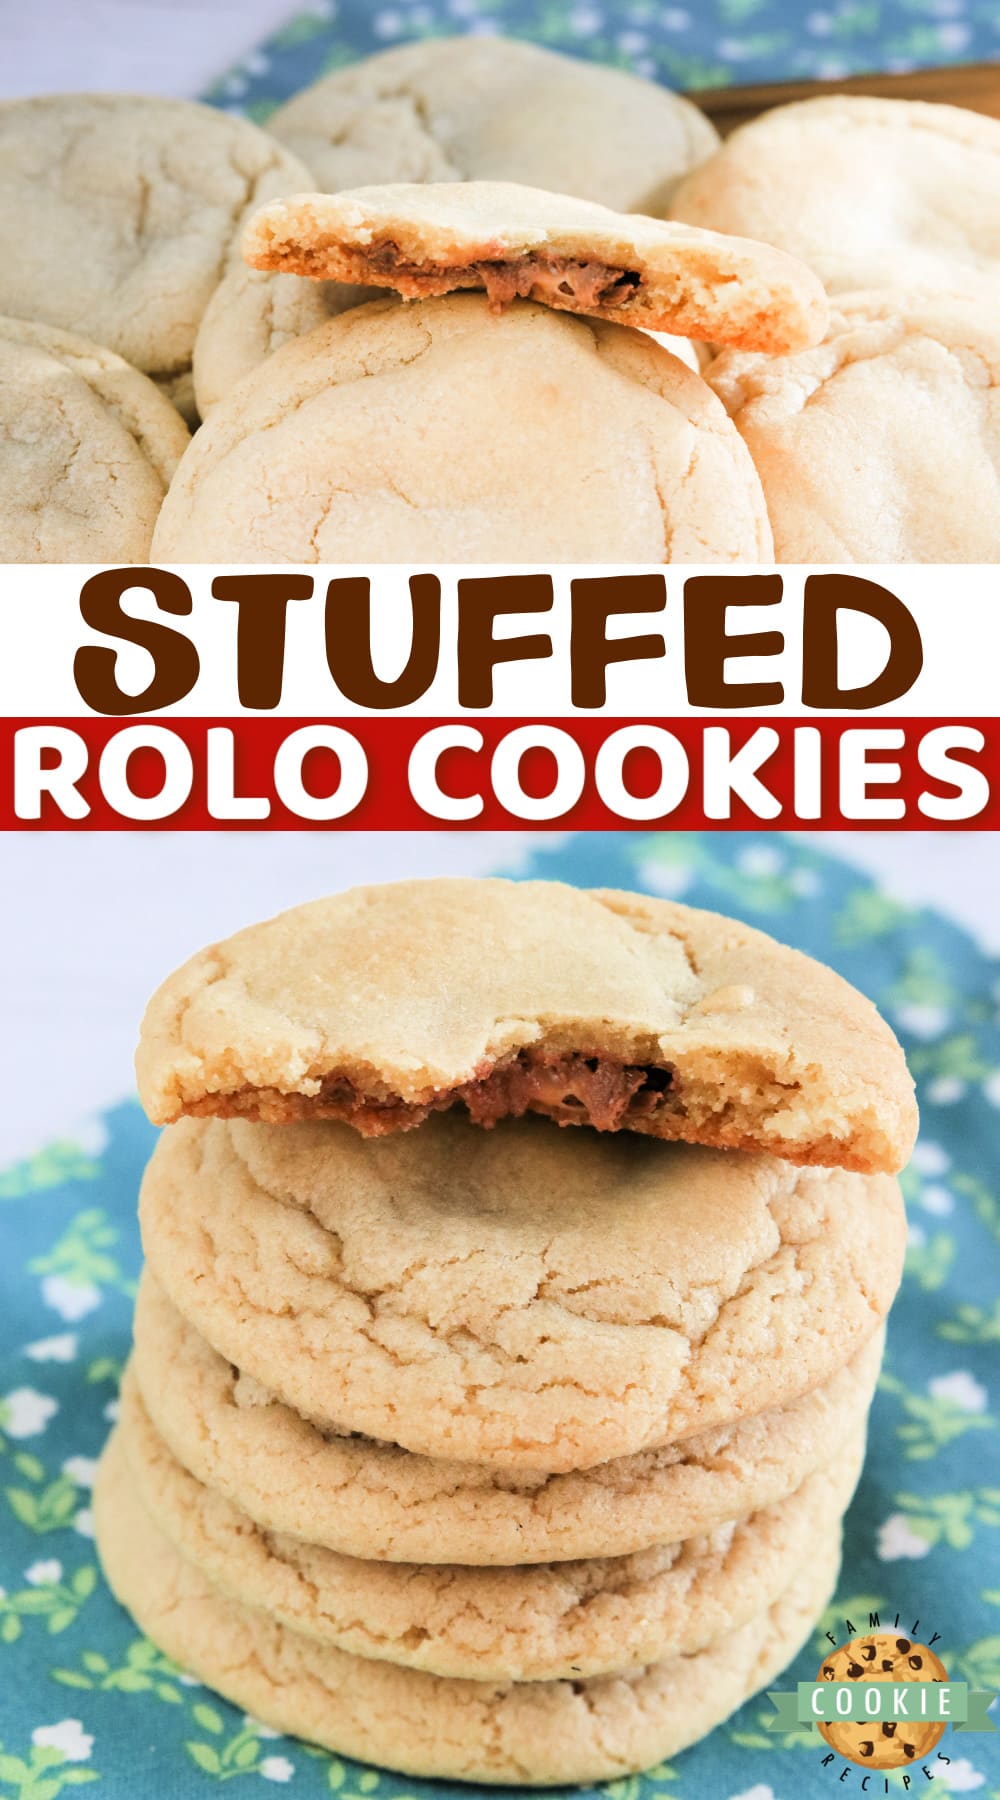 Stuffed Rolo Cookies are soft and chewy, with a melted Rolo candy in the center. Simple cookie recipe that is one of my all-time favorites!